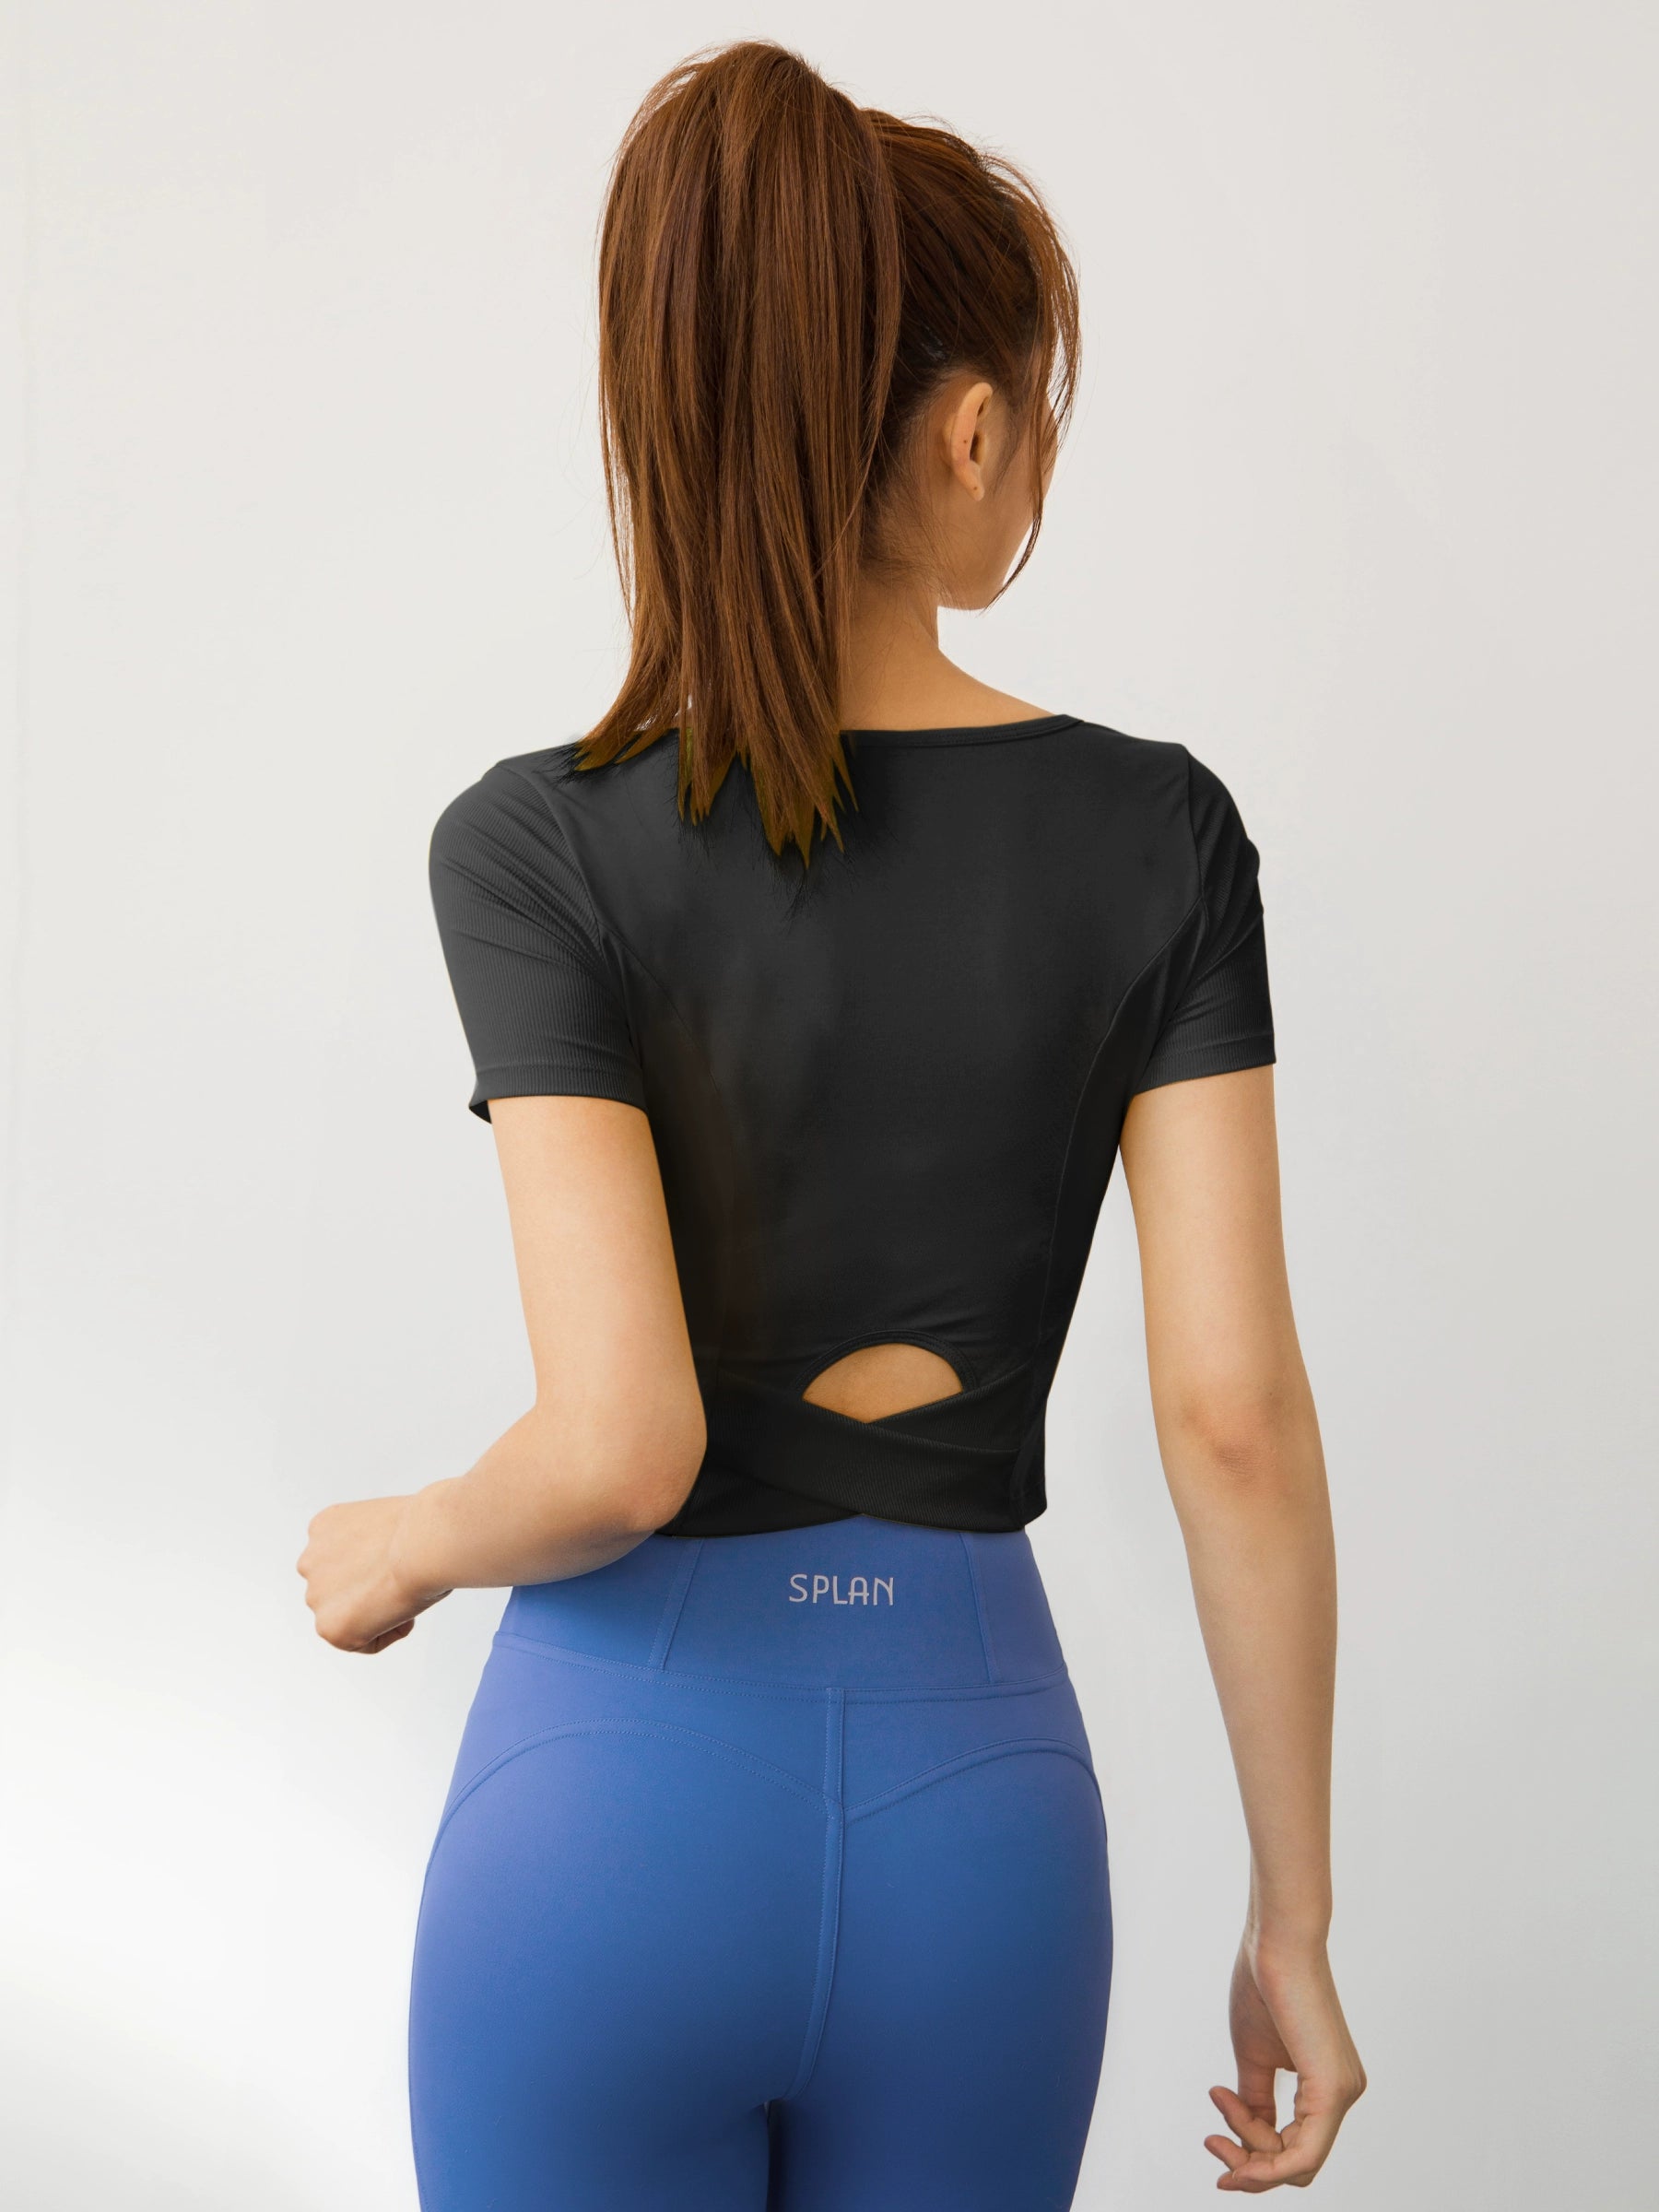 back view of a teenage girl wearing a T-shirt Nude Feel for Yoga color black